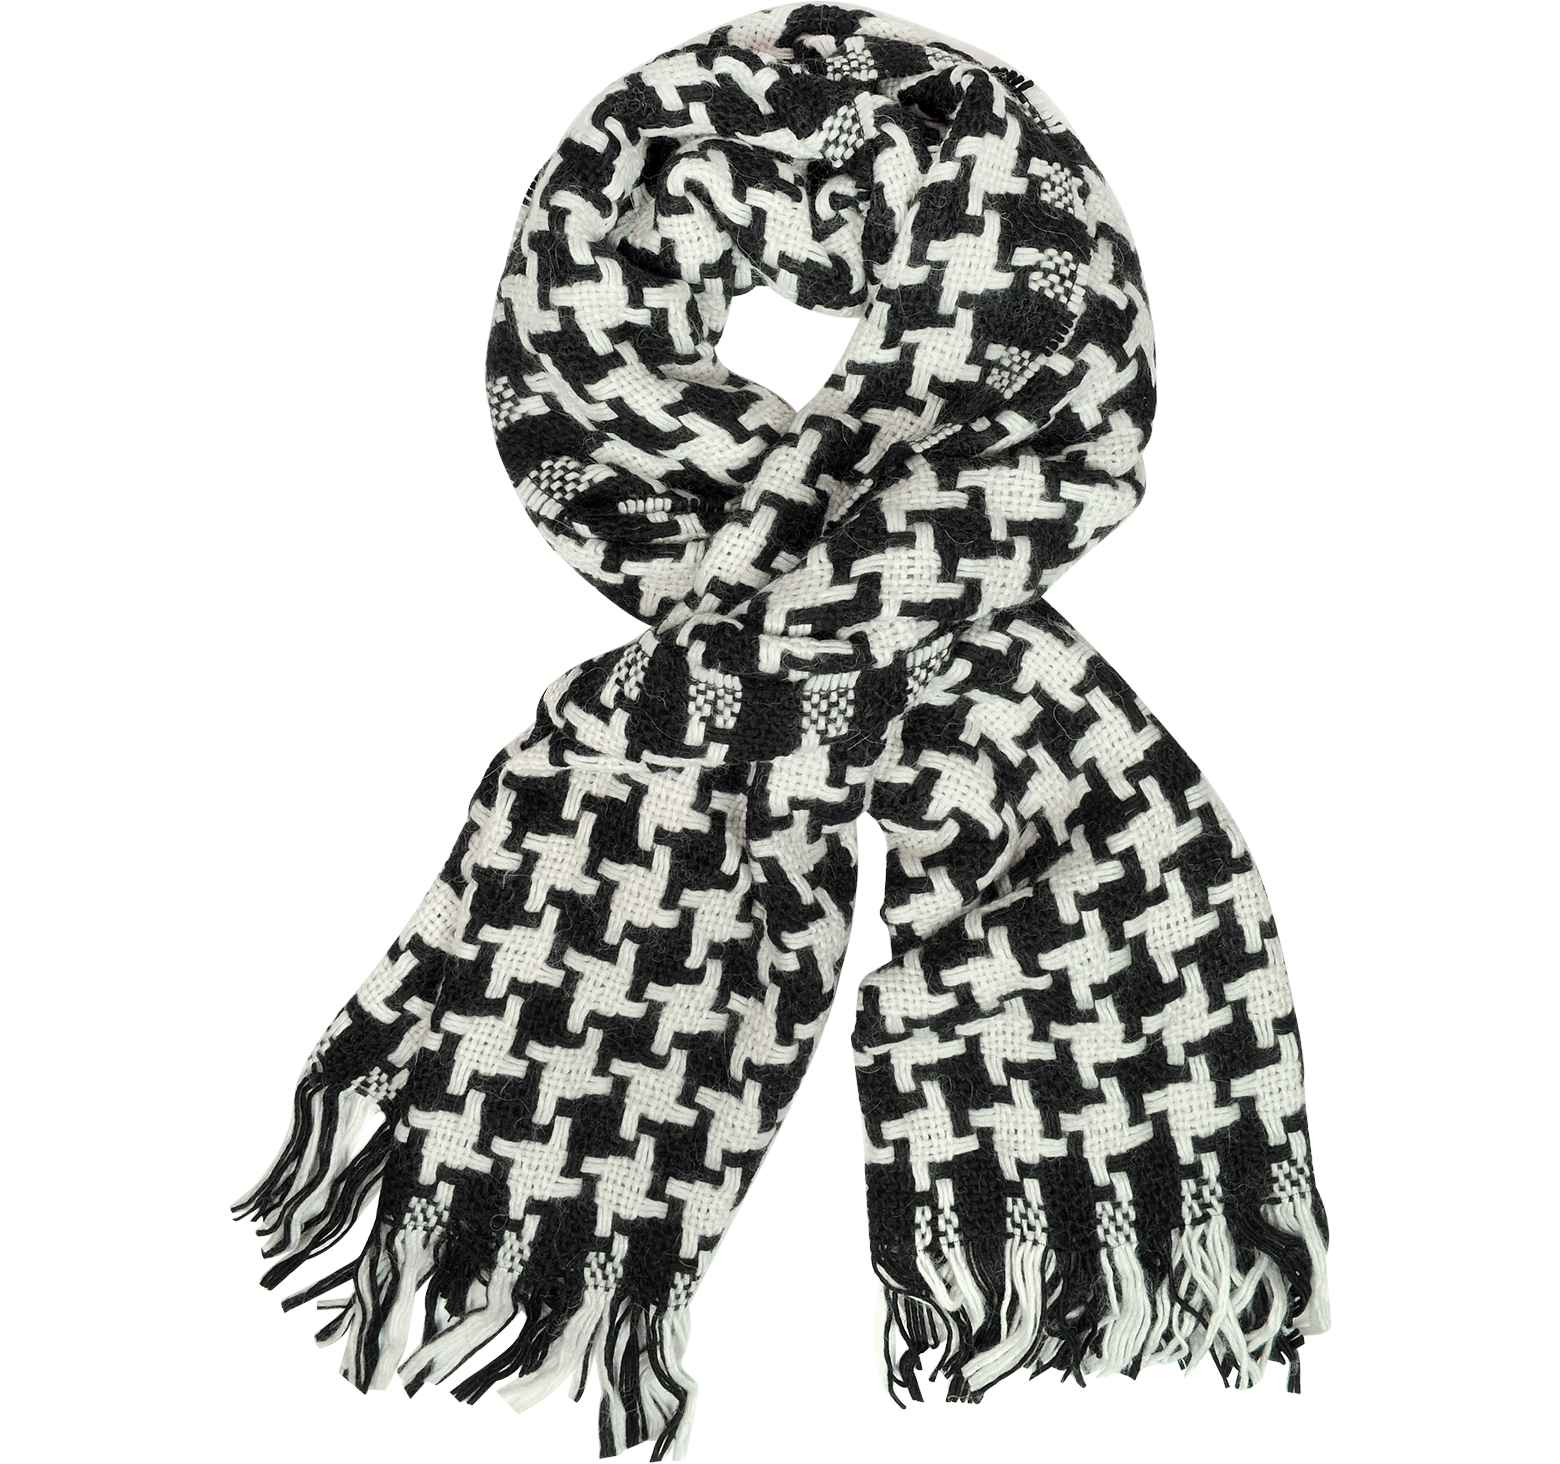 Moschino Black and White Oversized Wool Scarf at FORZIERI